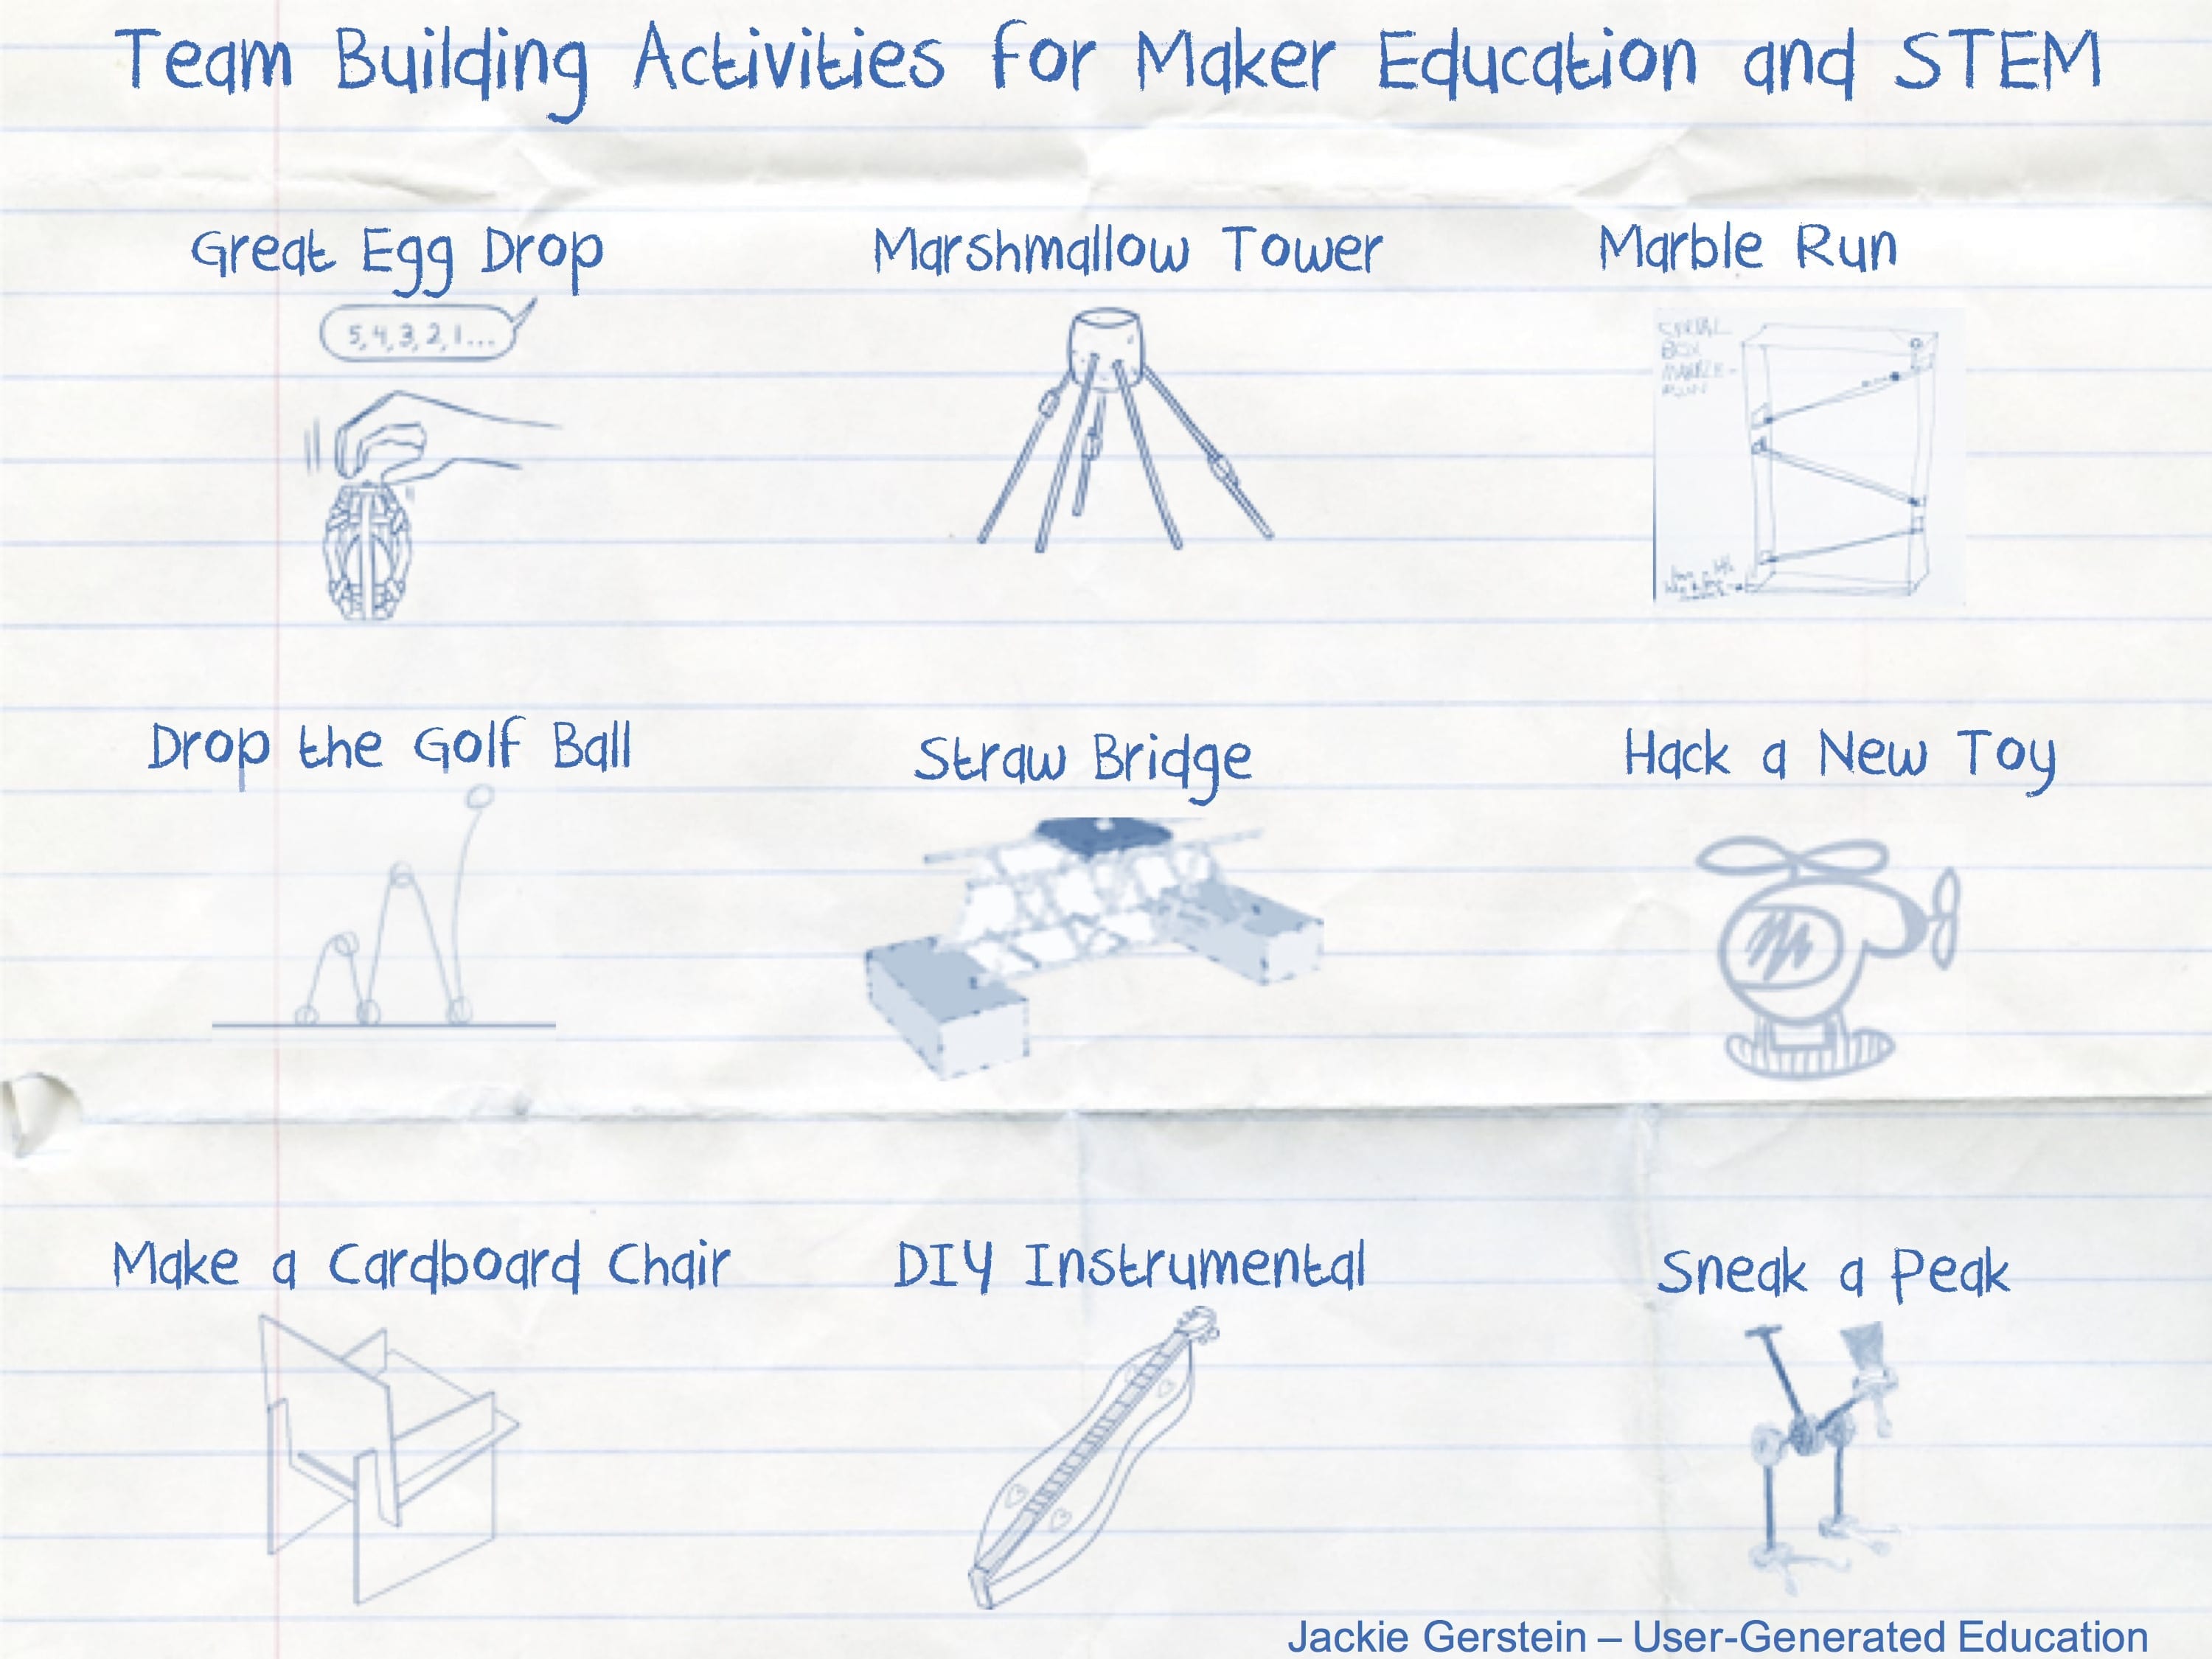 Team Building Activities That Support Maker Education Stem